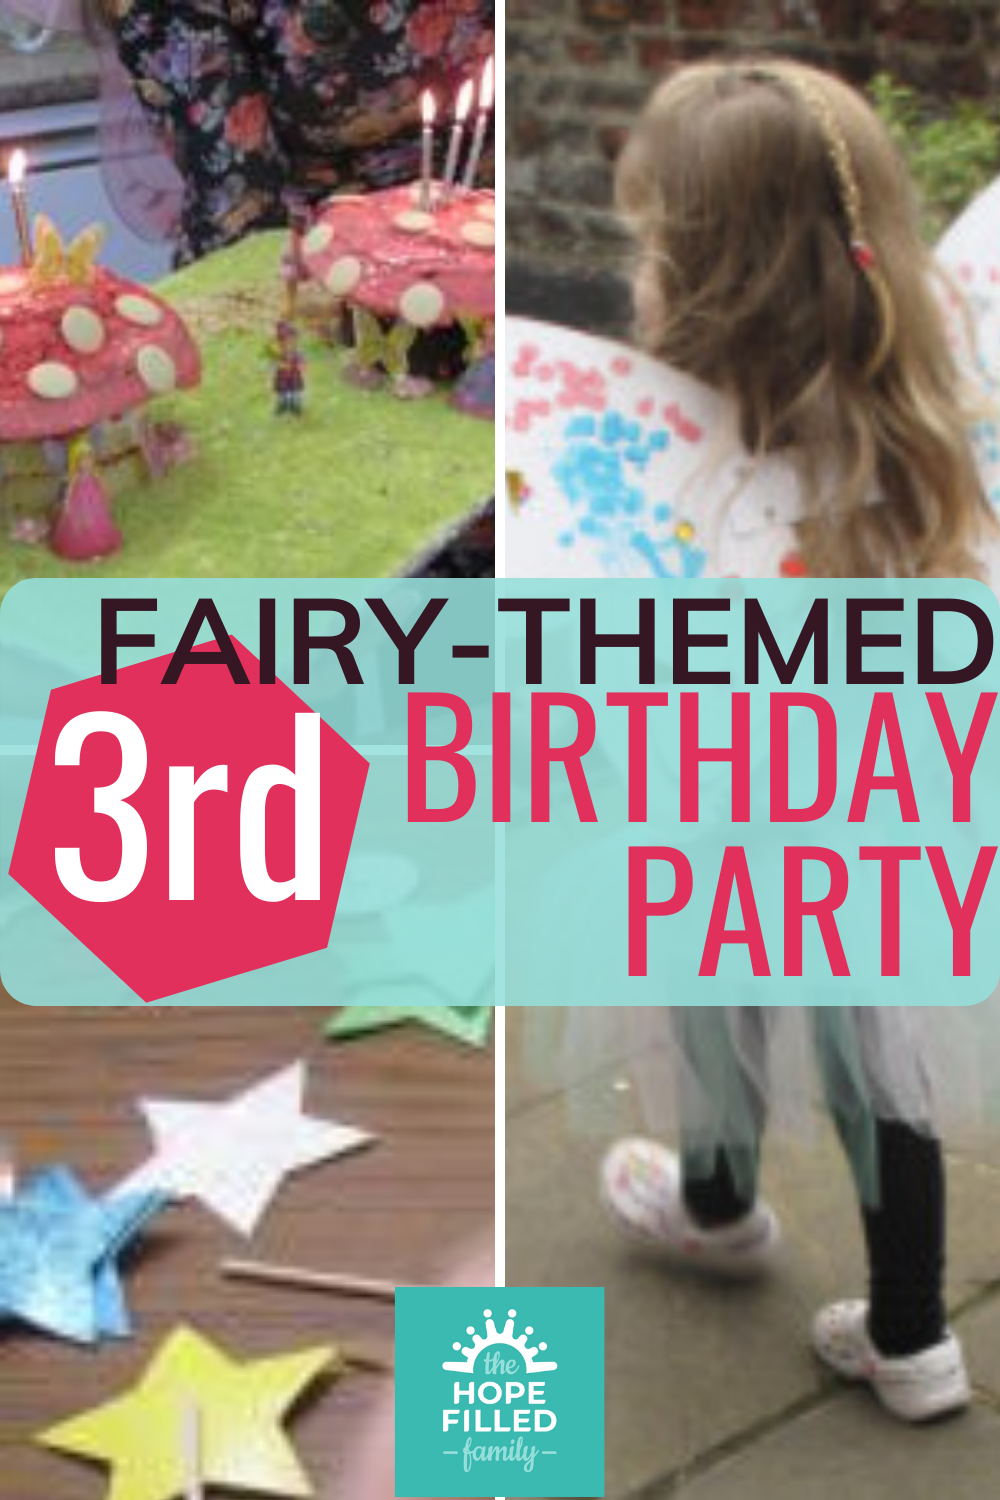 Fairy-themed 3rd birthday party for a 3 year old girl. Crafts, food, decorations, games and activities.